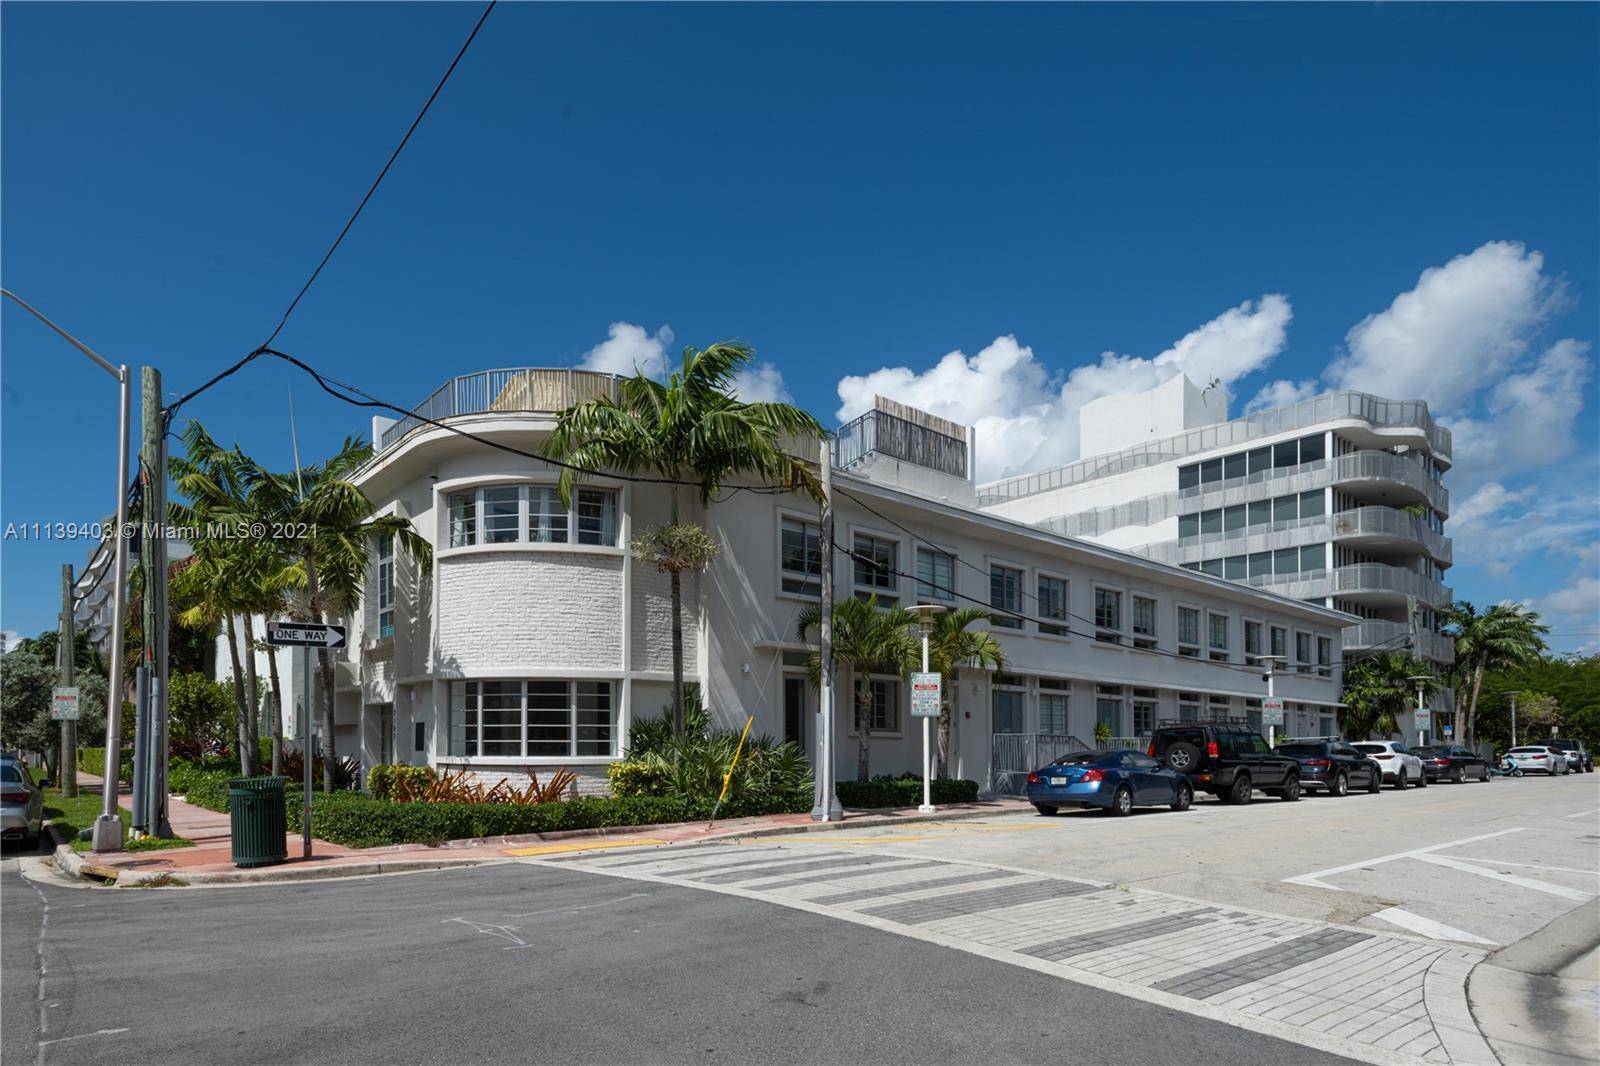 Very bright and spacious 2 stories townhouse style condo in South Beach with private entry.